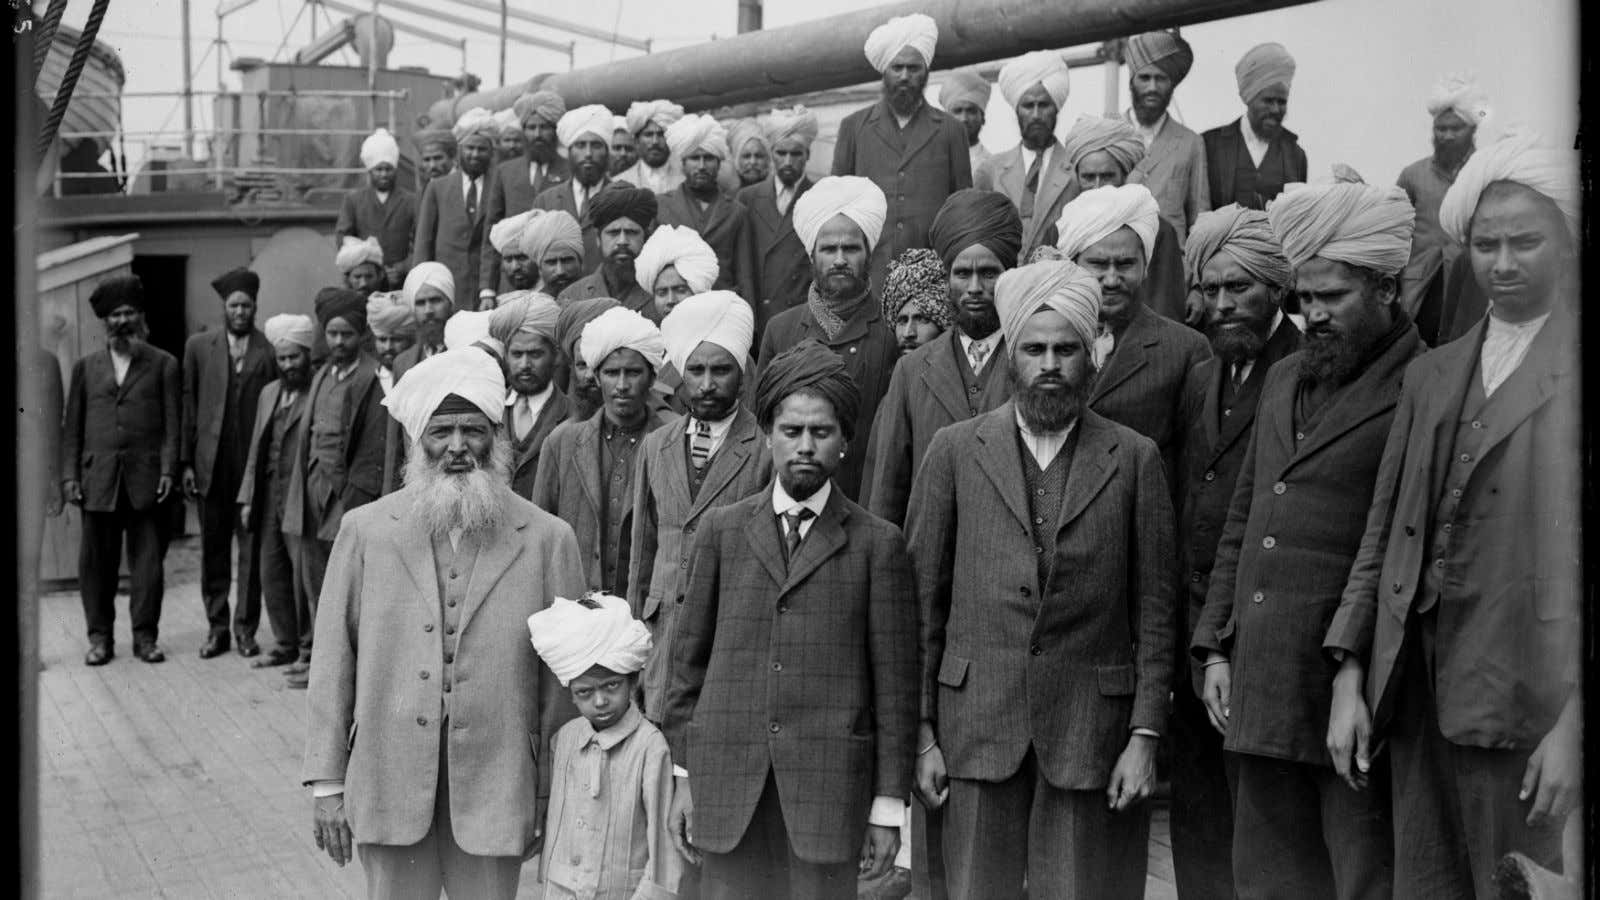 A group of Sikhs attempting to enter Canada in 1914